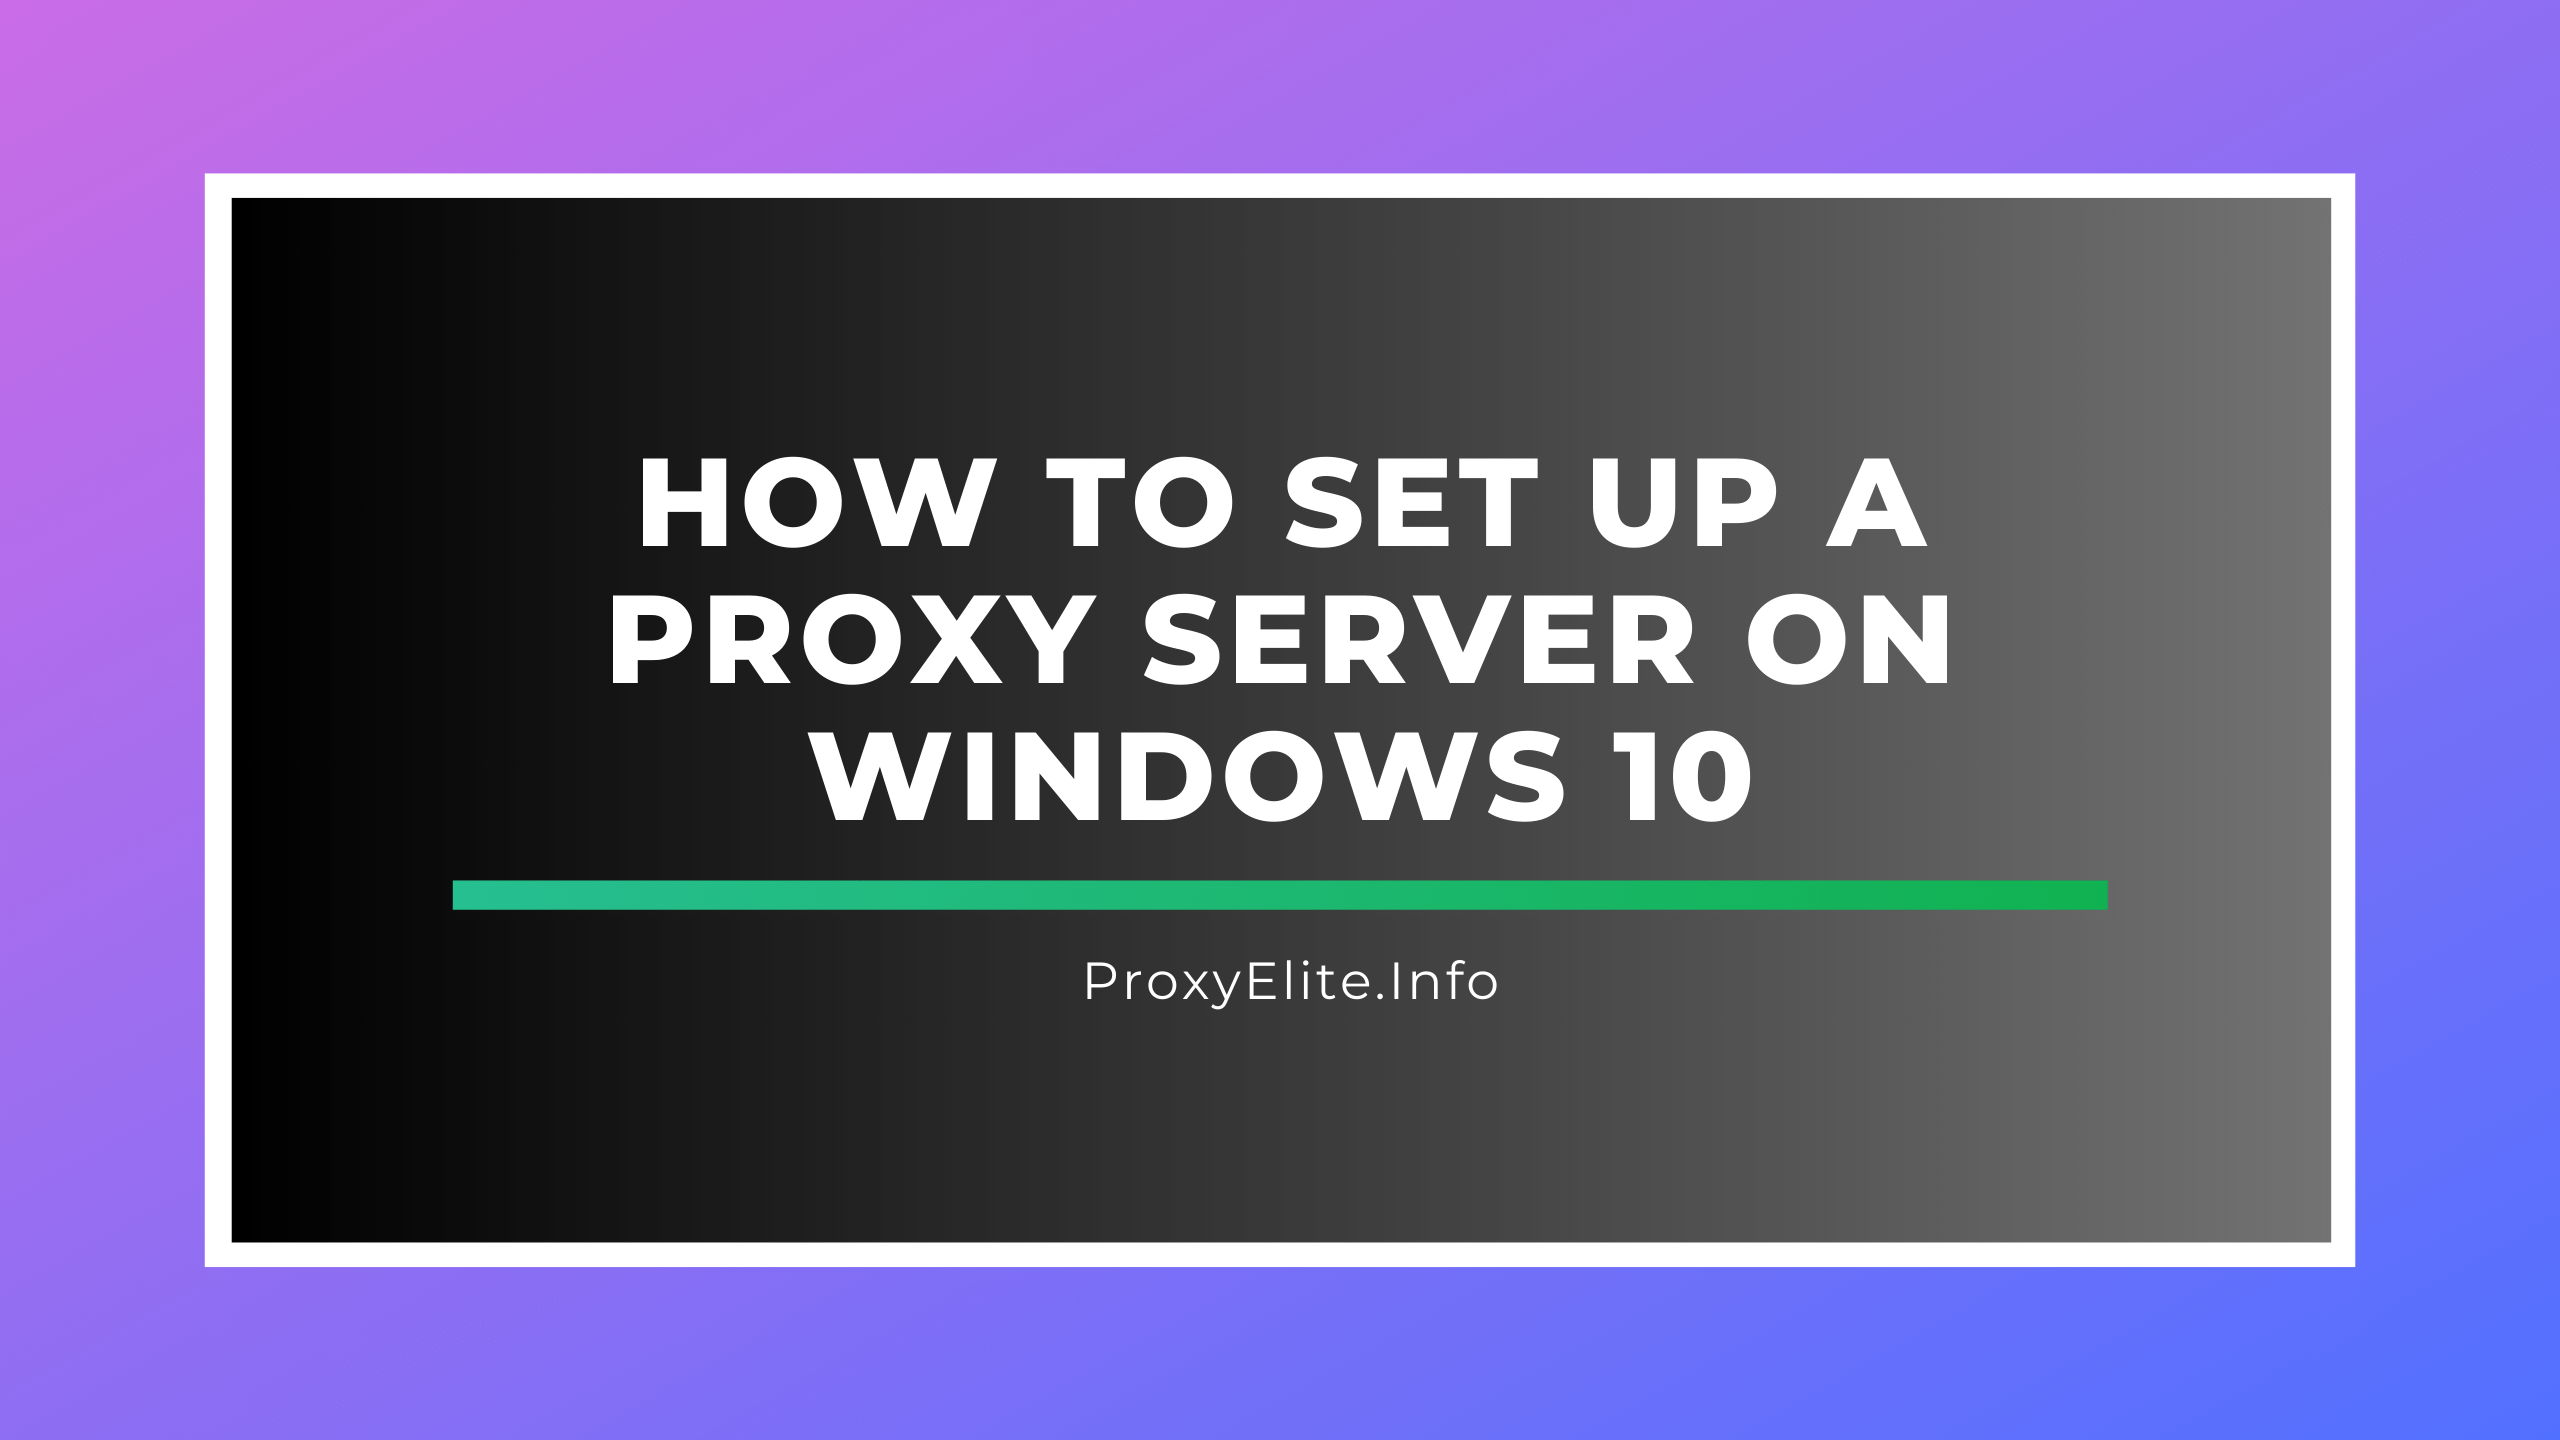 How to Set Up a Proxy Server on Windows 10